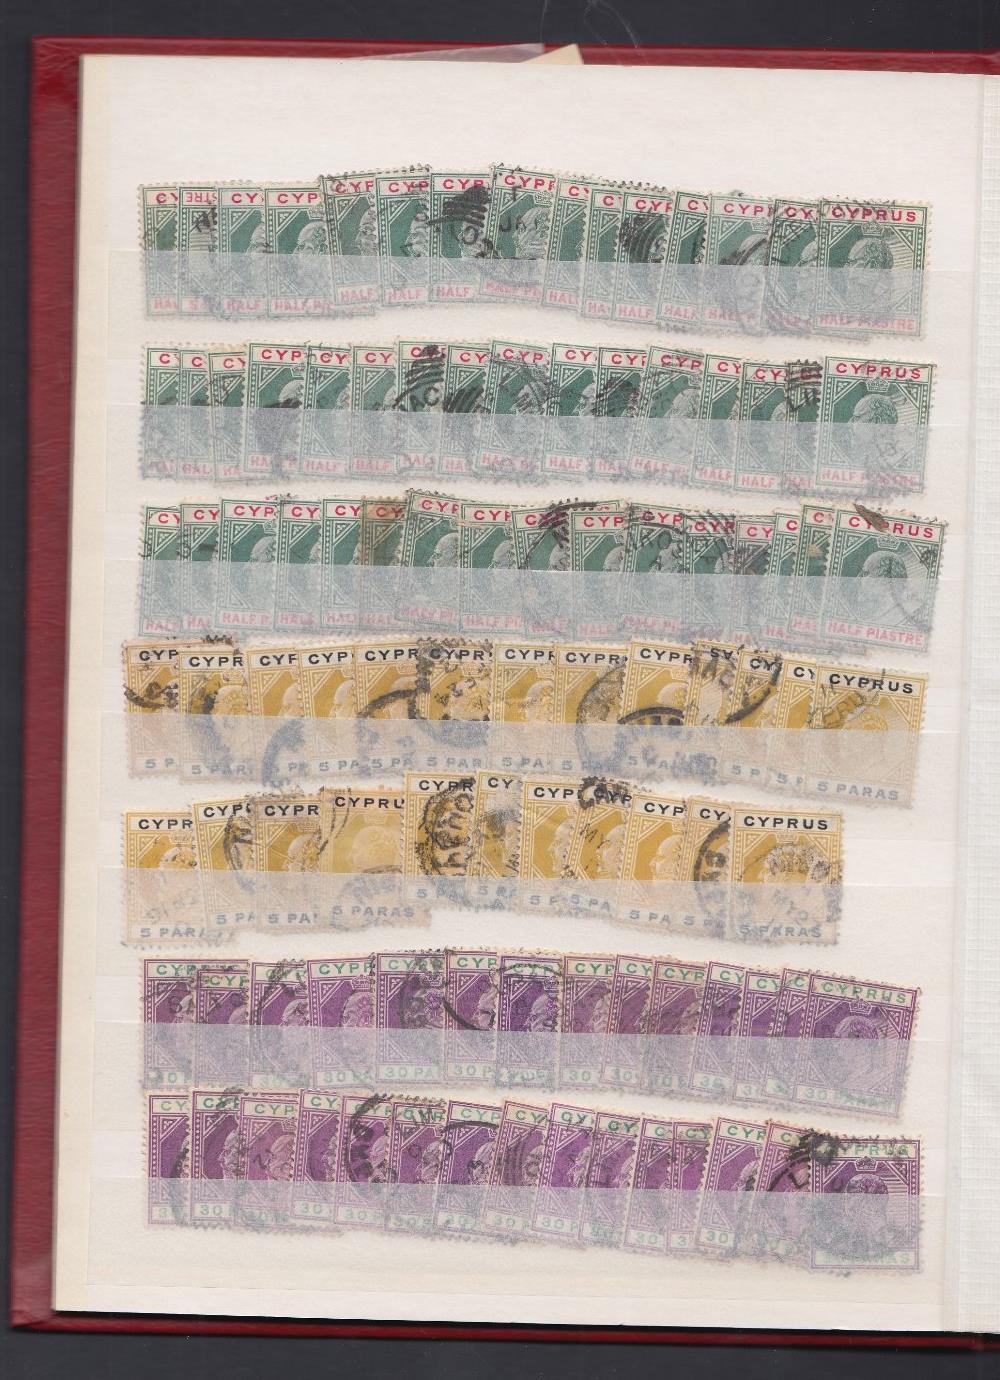 STAMPS CYPRUS - An ex-dealers mint and used duplicated stock housed in two stock books with QV to - Image 3 of 3